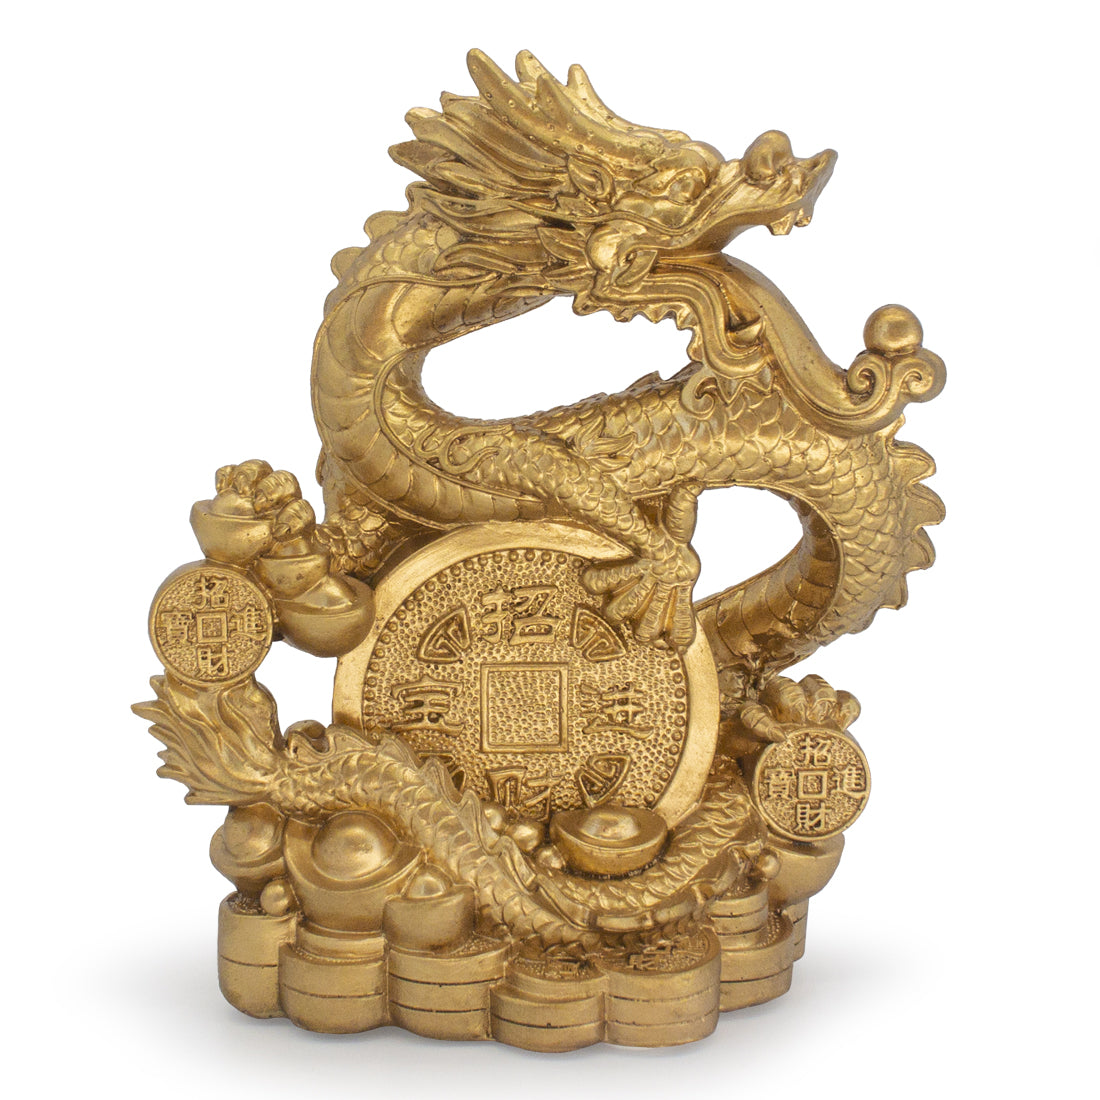 Dragon with Gold Coins - Original Source